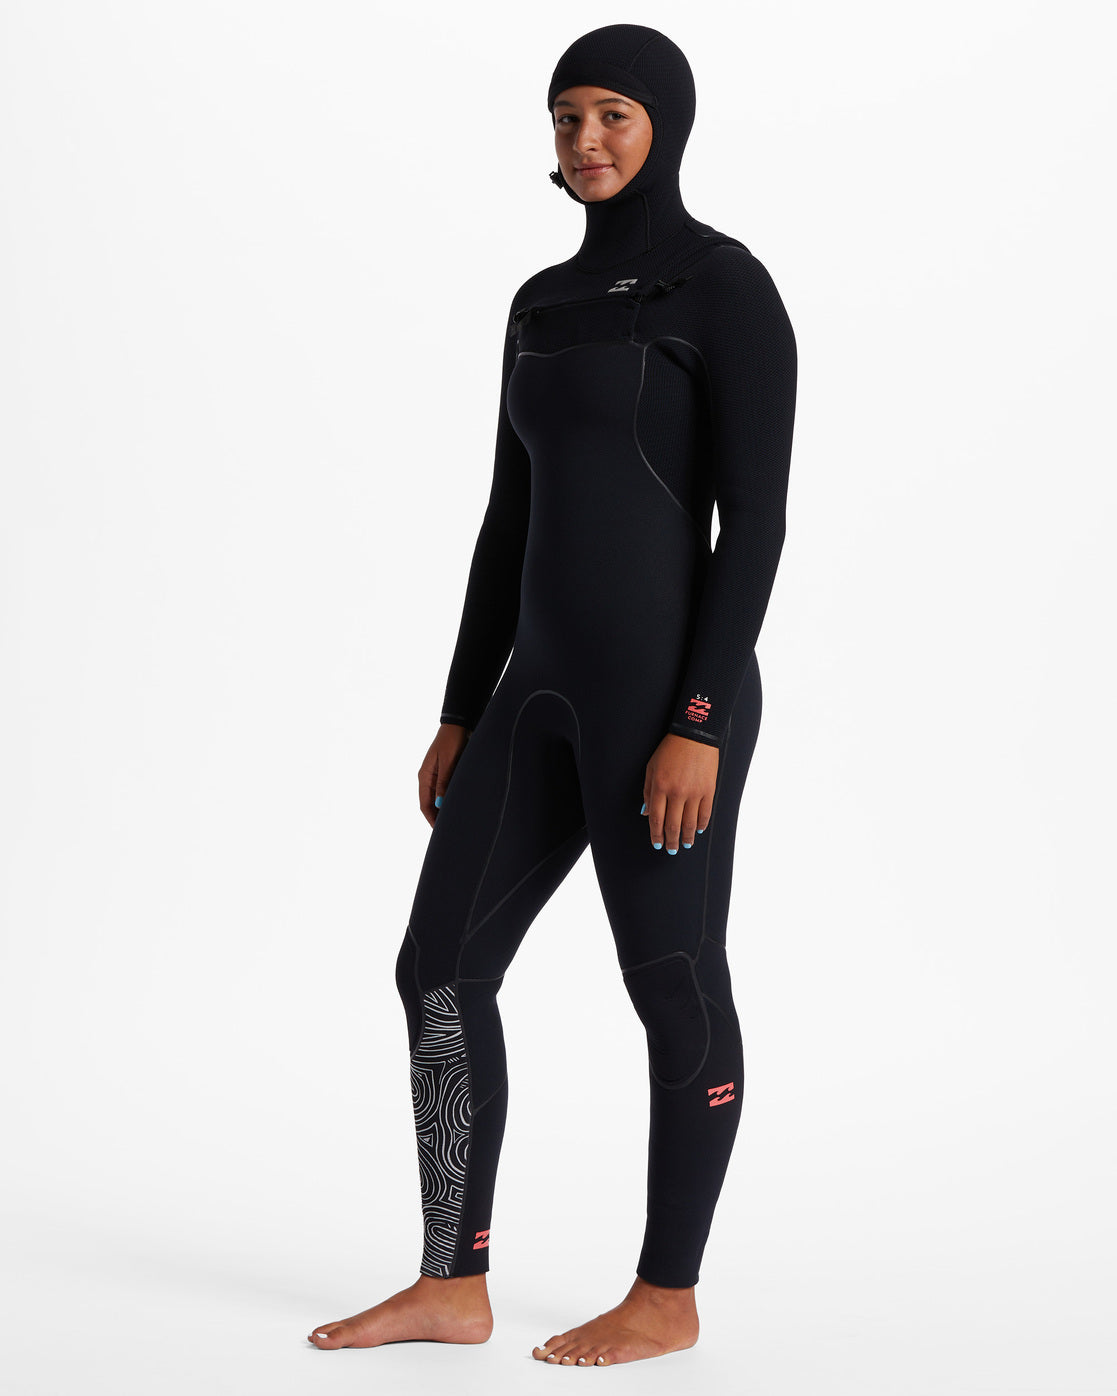 5/4 Furnace Chest Zip Hooded Wetsuit - Midnight Trails